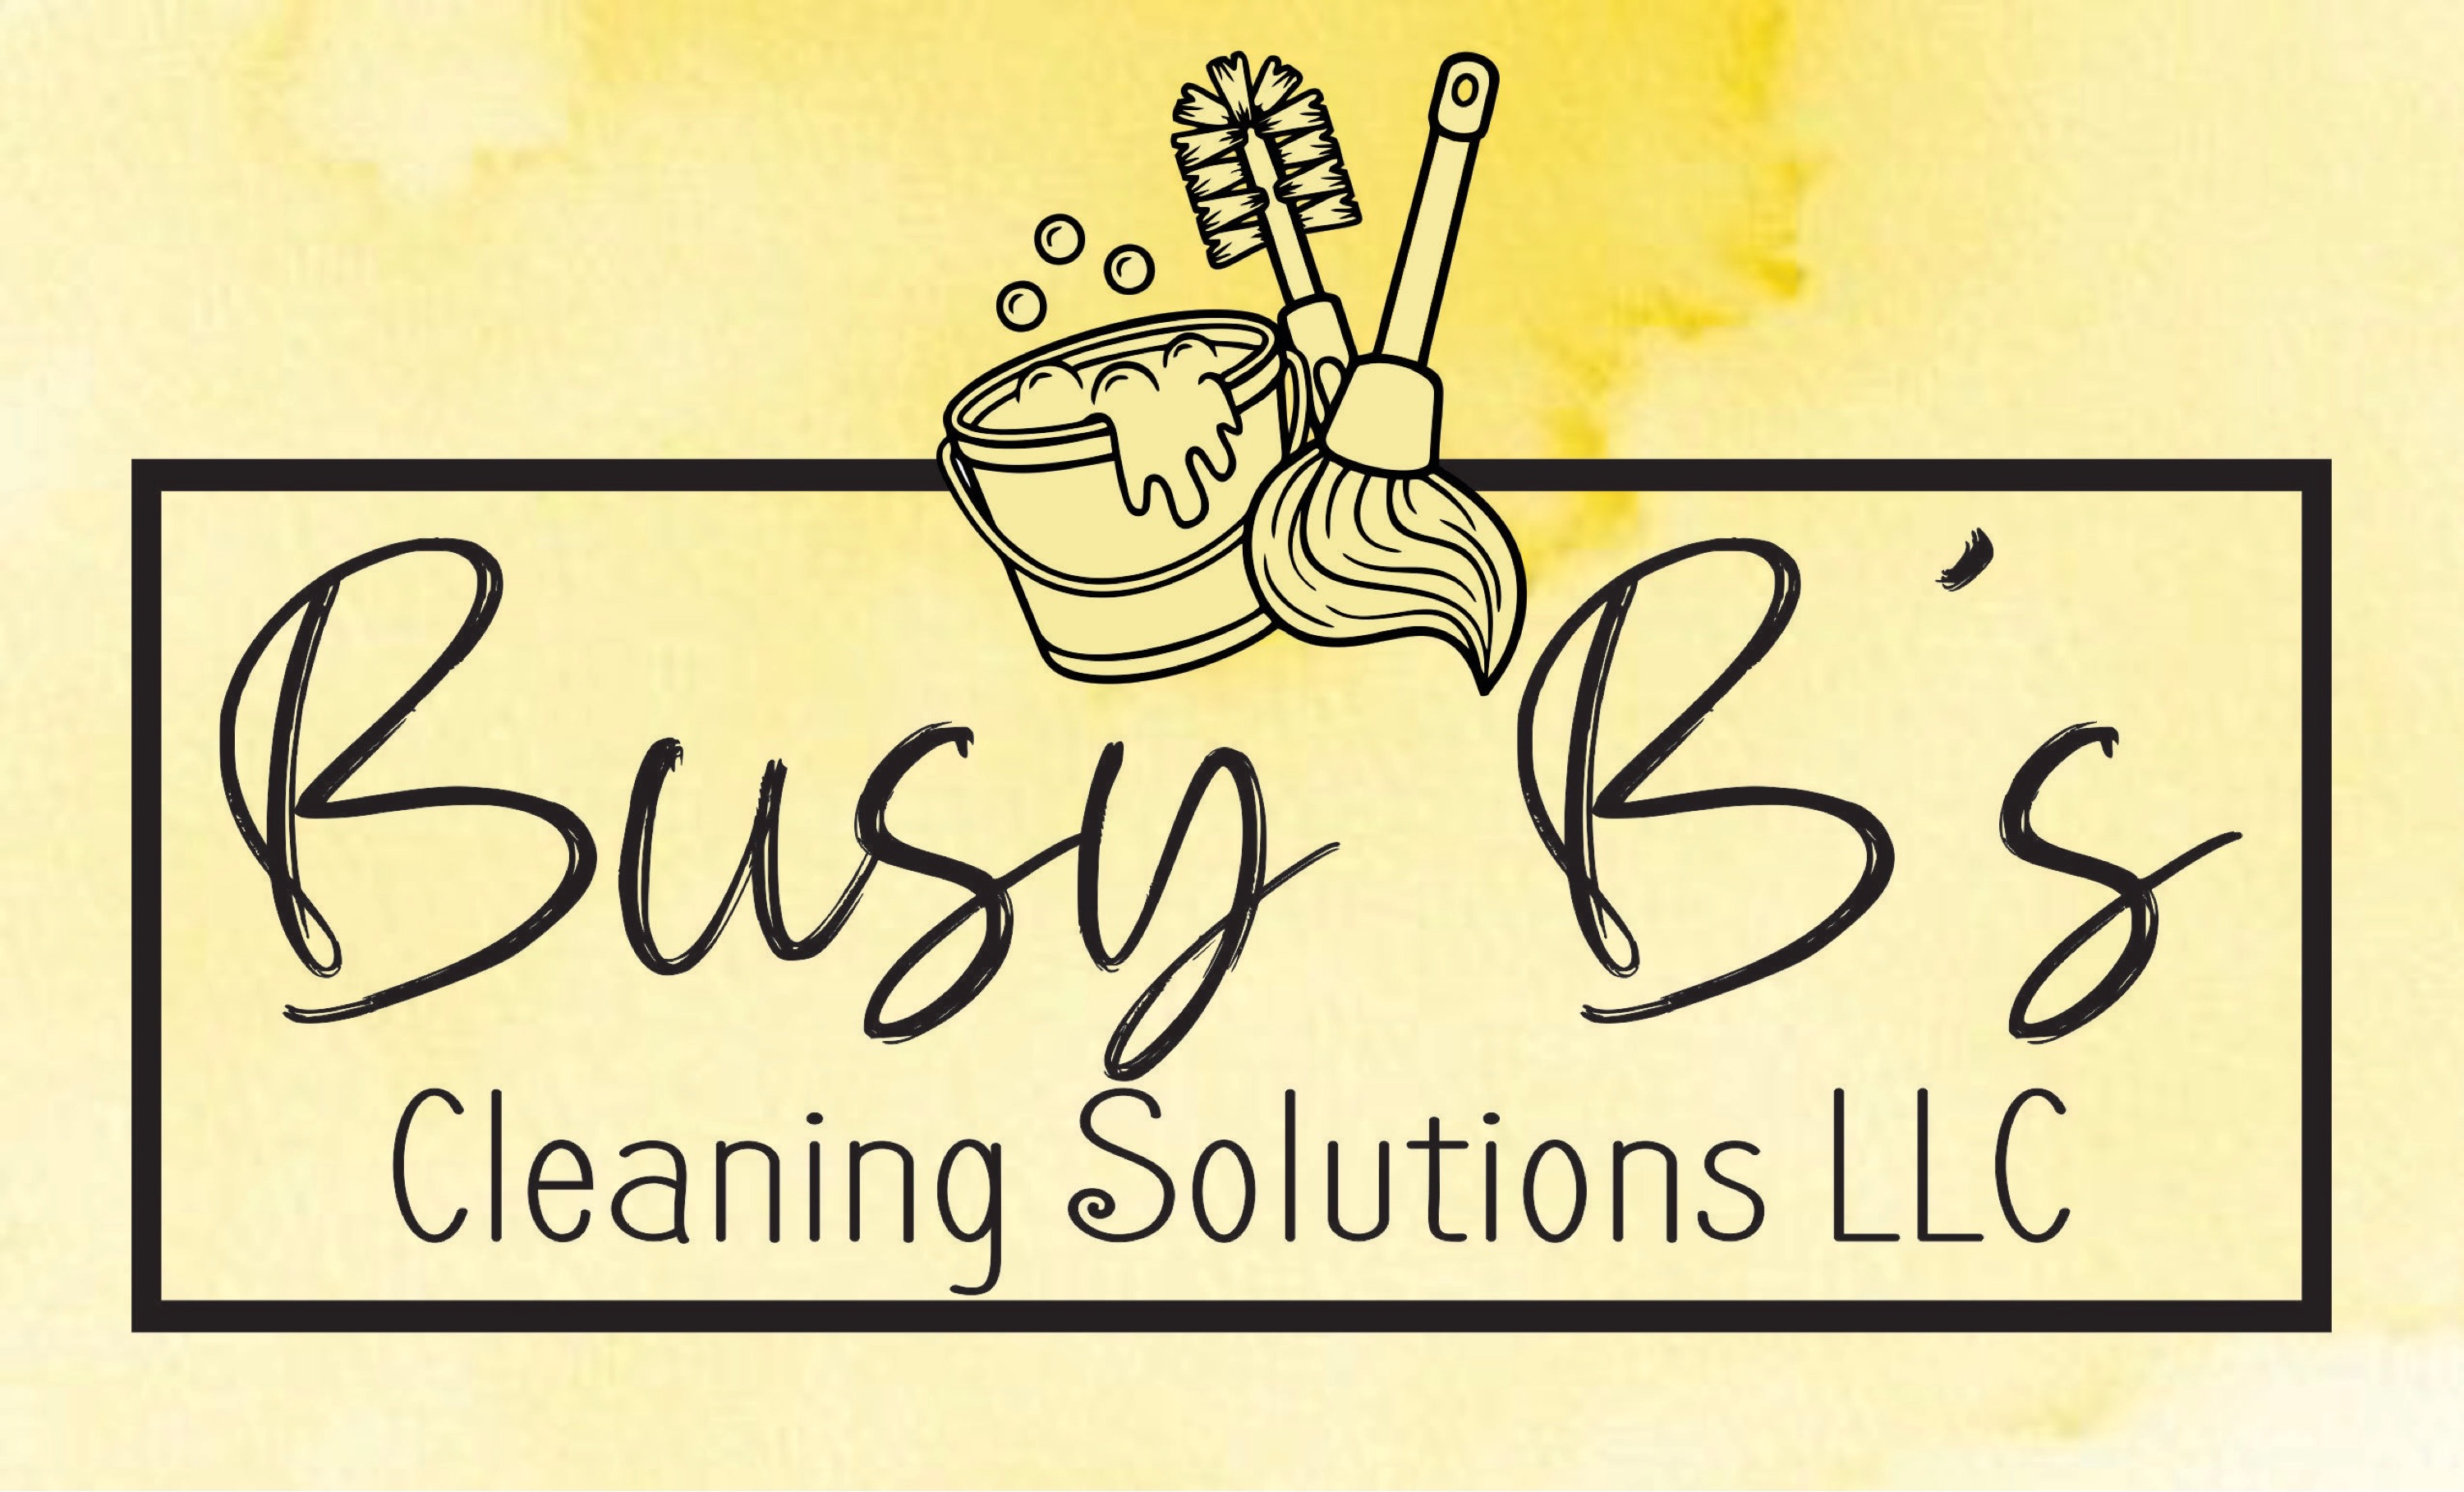 Busy B's Cleaning Solutions LLC Logo